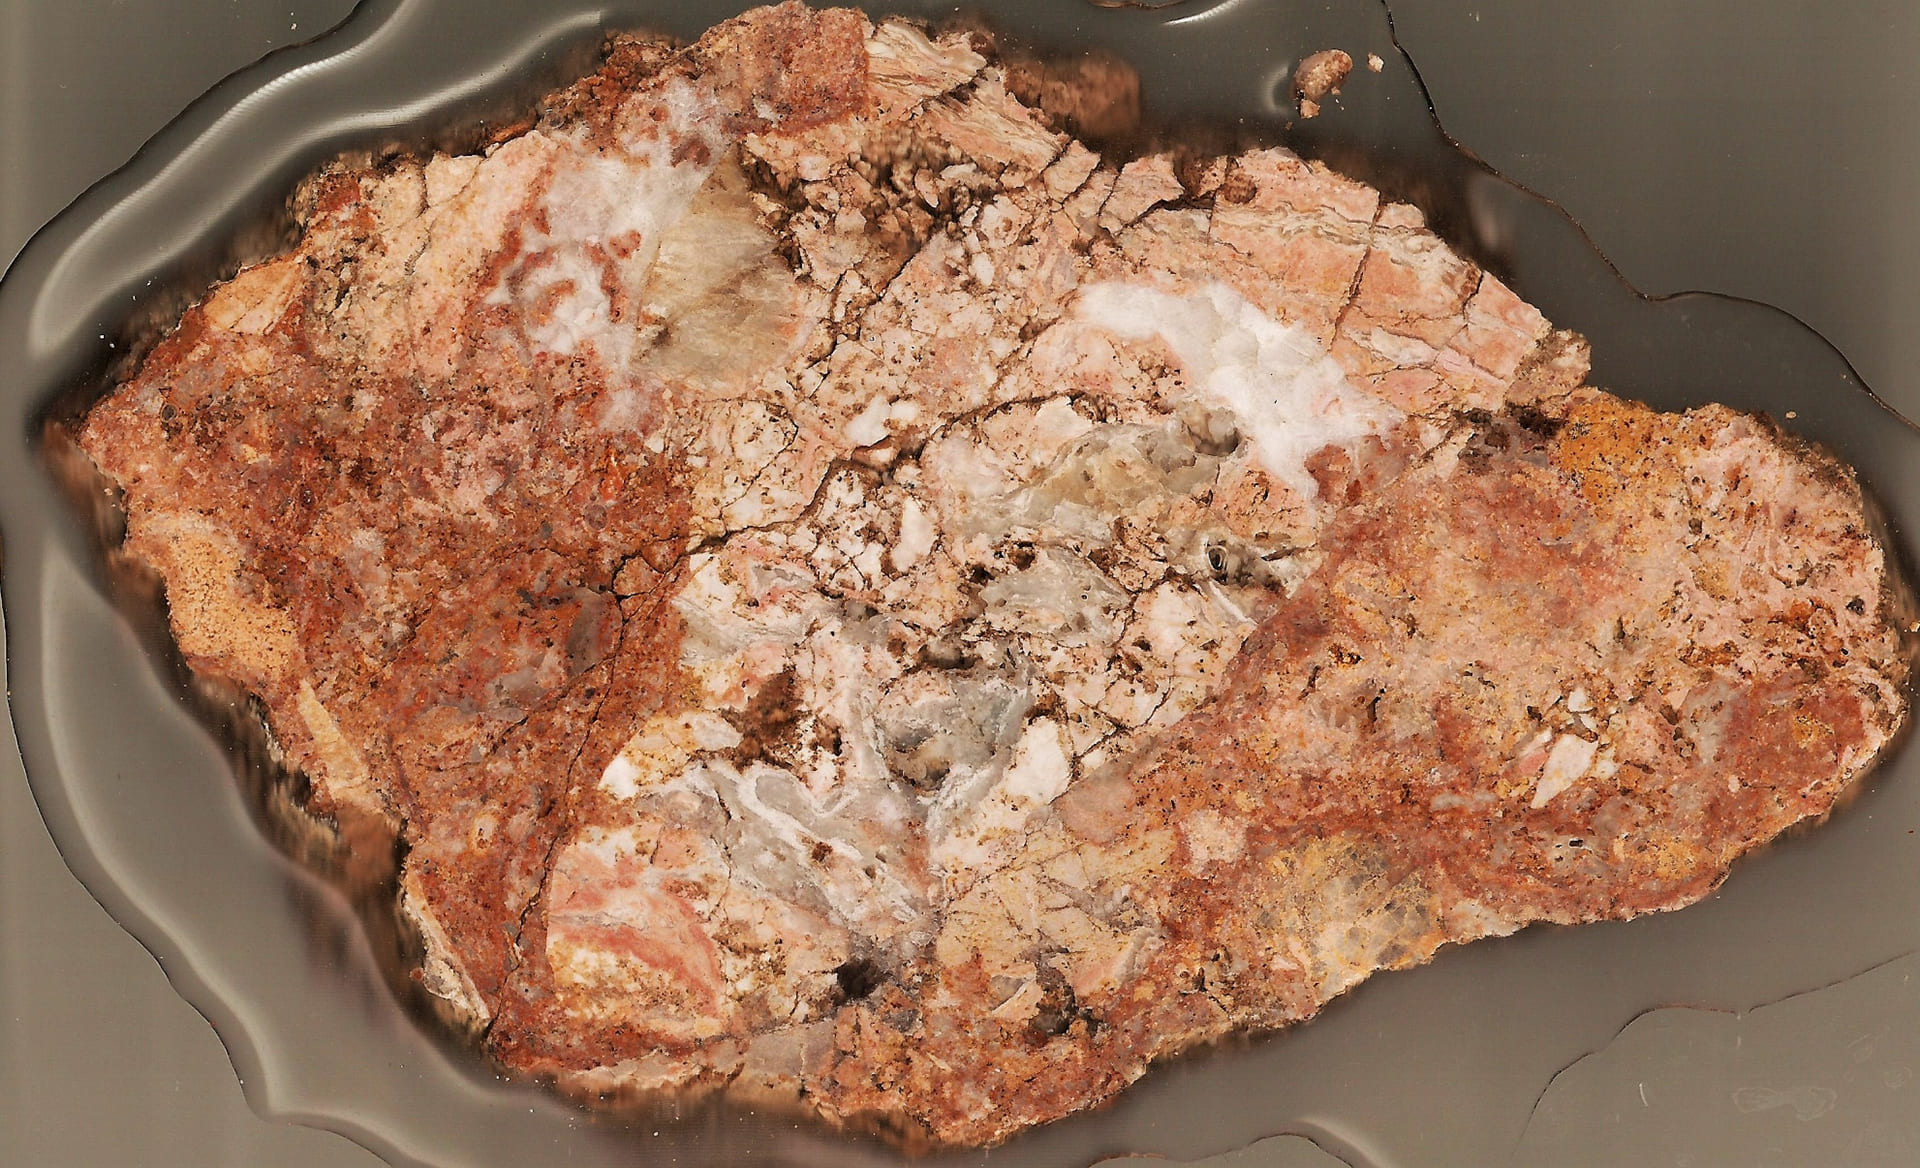 Decalcified jasperoid breccia with 1.3 g/t Au